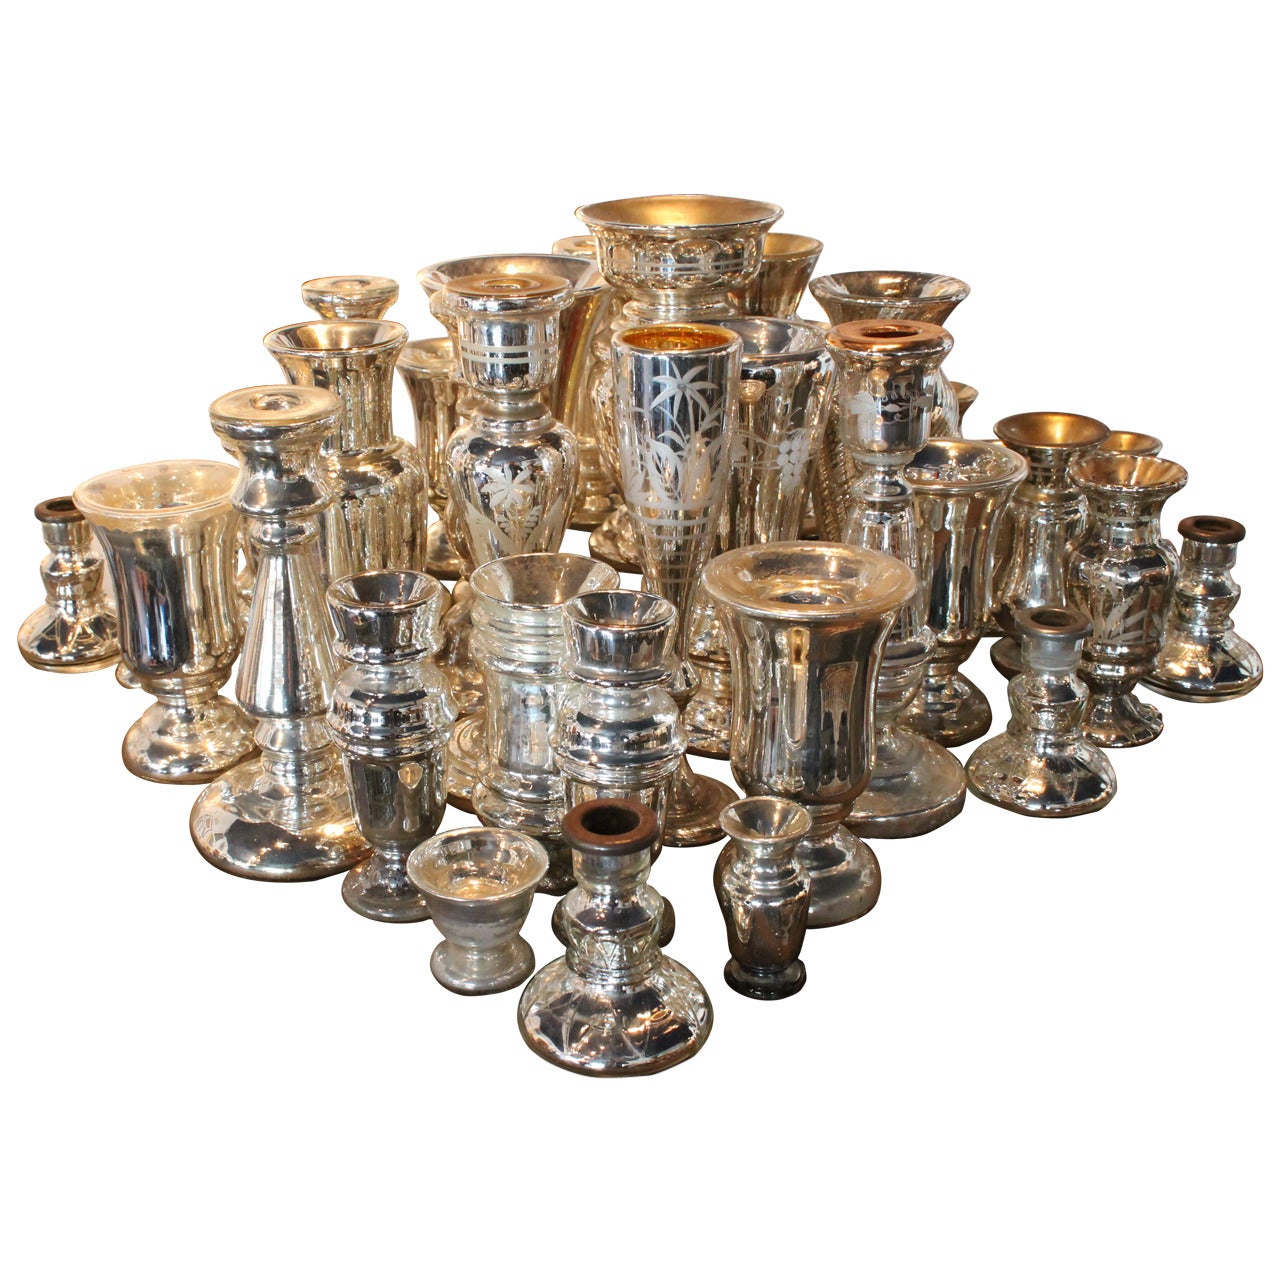 Large Collection of 19th Century Mercury Glass Vessels